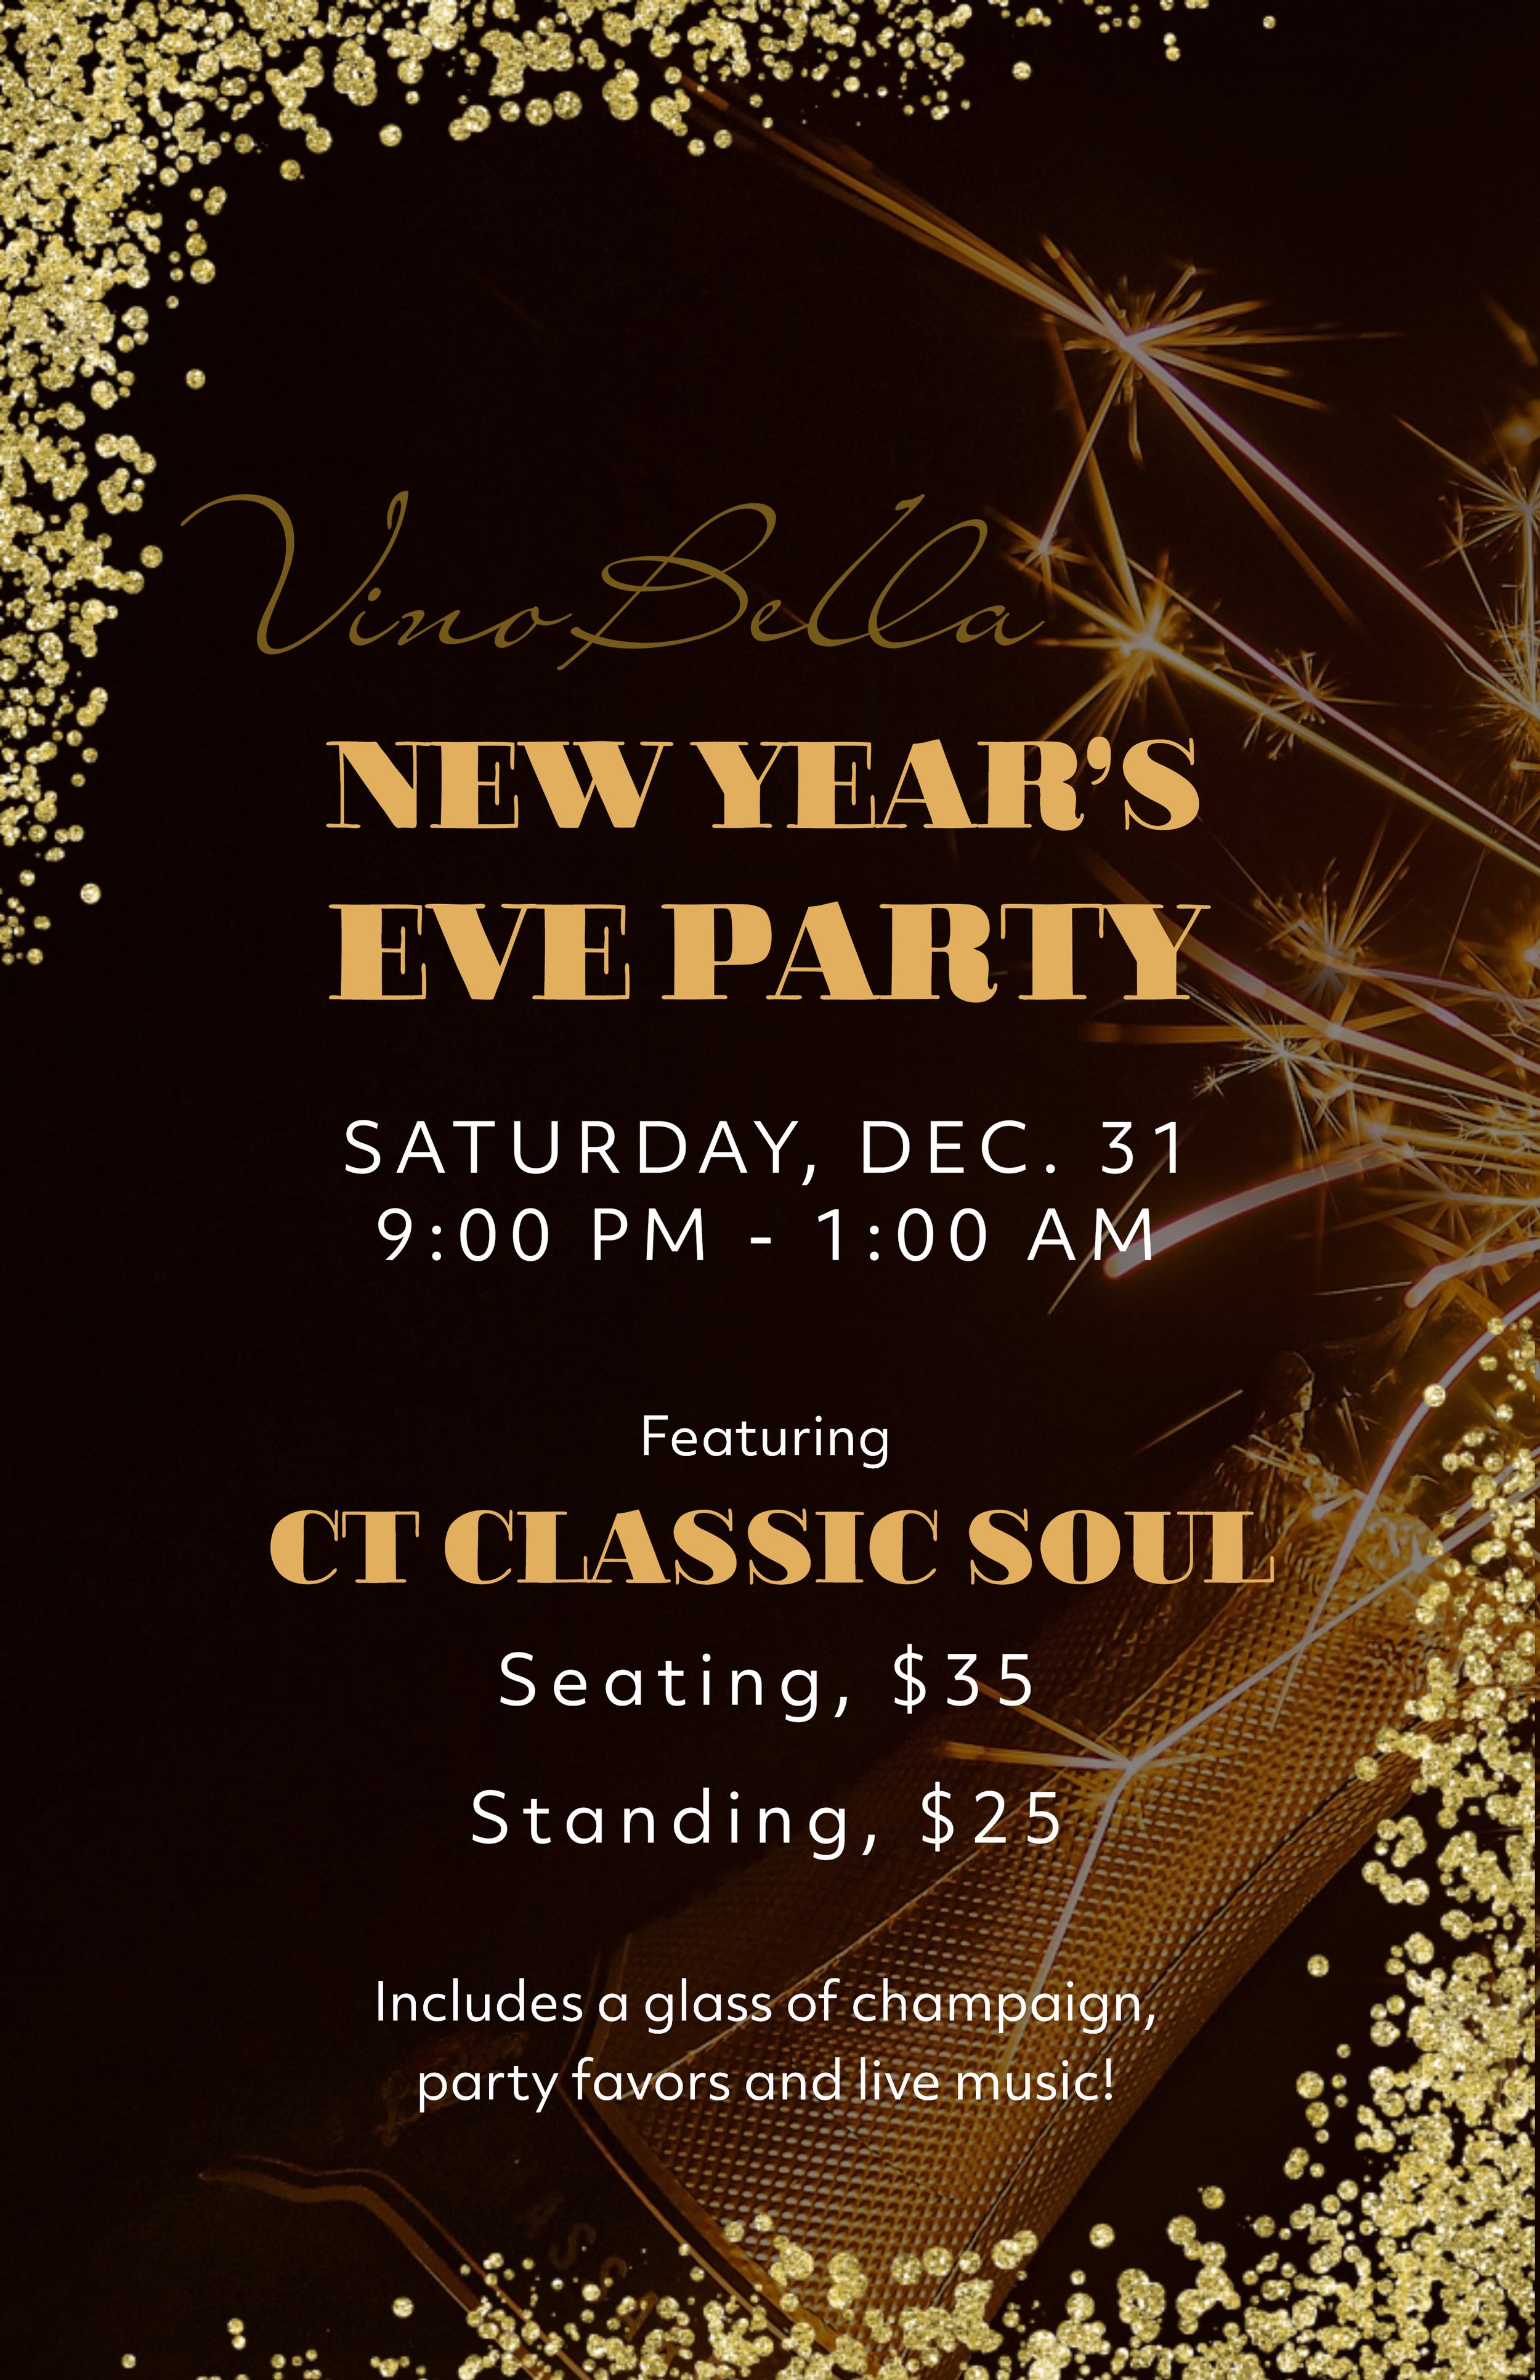 New Years Eve Party with CT Classic Soul — Vino Bella